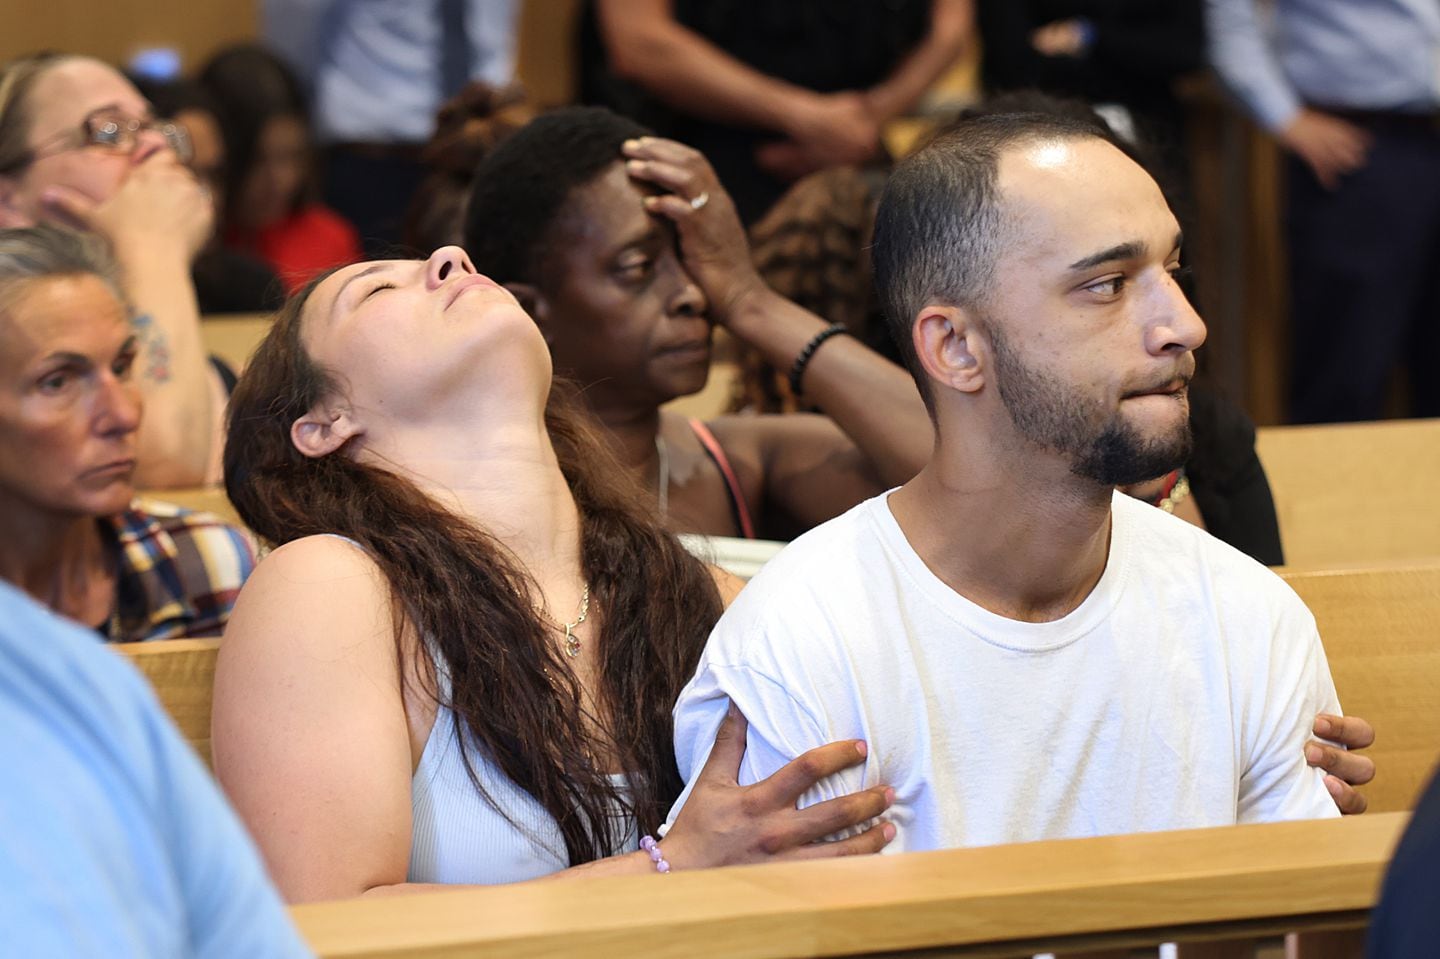 Scott Dickey (right) reacted while Trevor Bady, 21, was arraigned Tuesday in the killing of Dickey's daughter, Ahliana M. Dickey. The 15-year-old girl was found dead of gunshot wounds Friday in her home in Lowell.